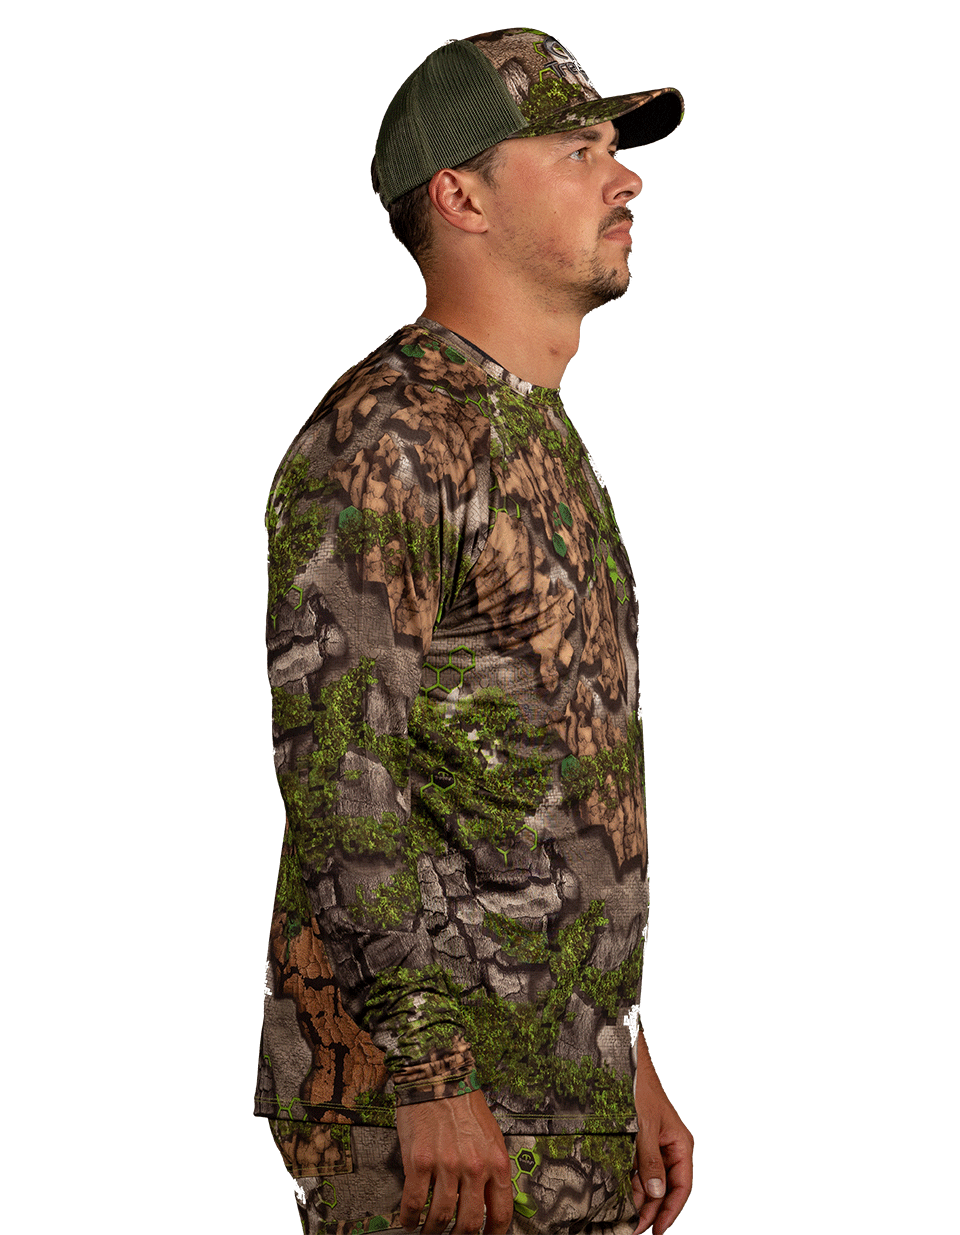 Men's Camo Check T Shirt Camouflage Top Army / Military / Hunting